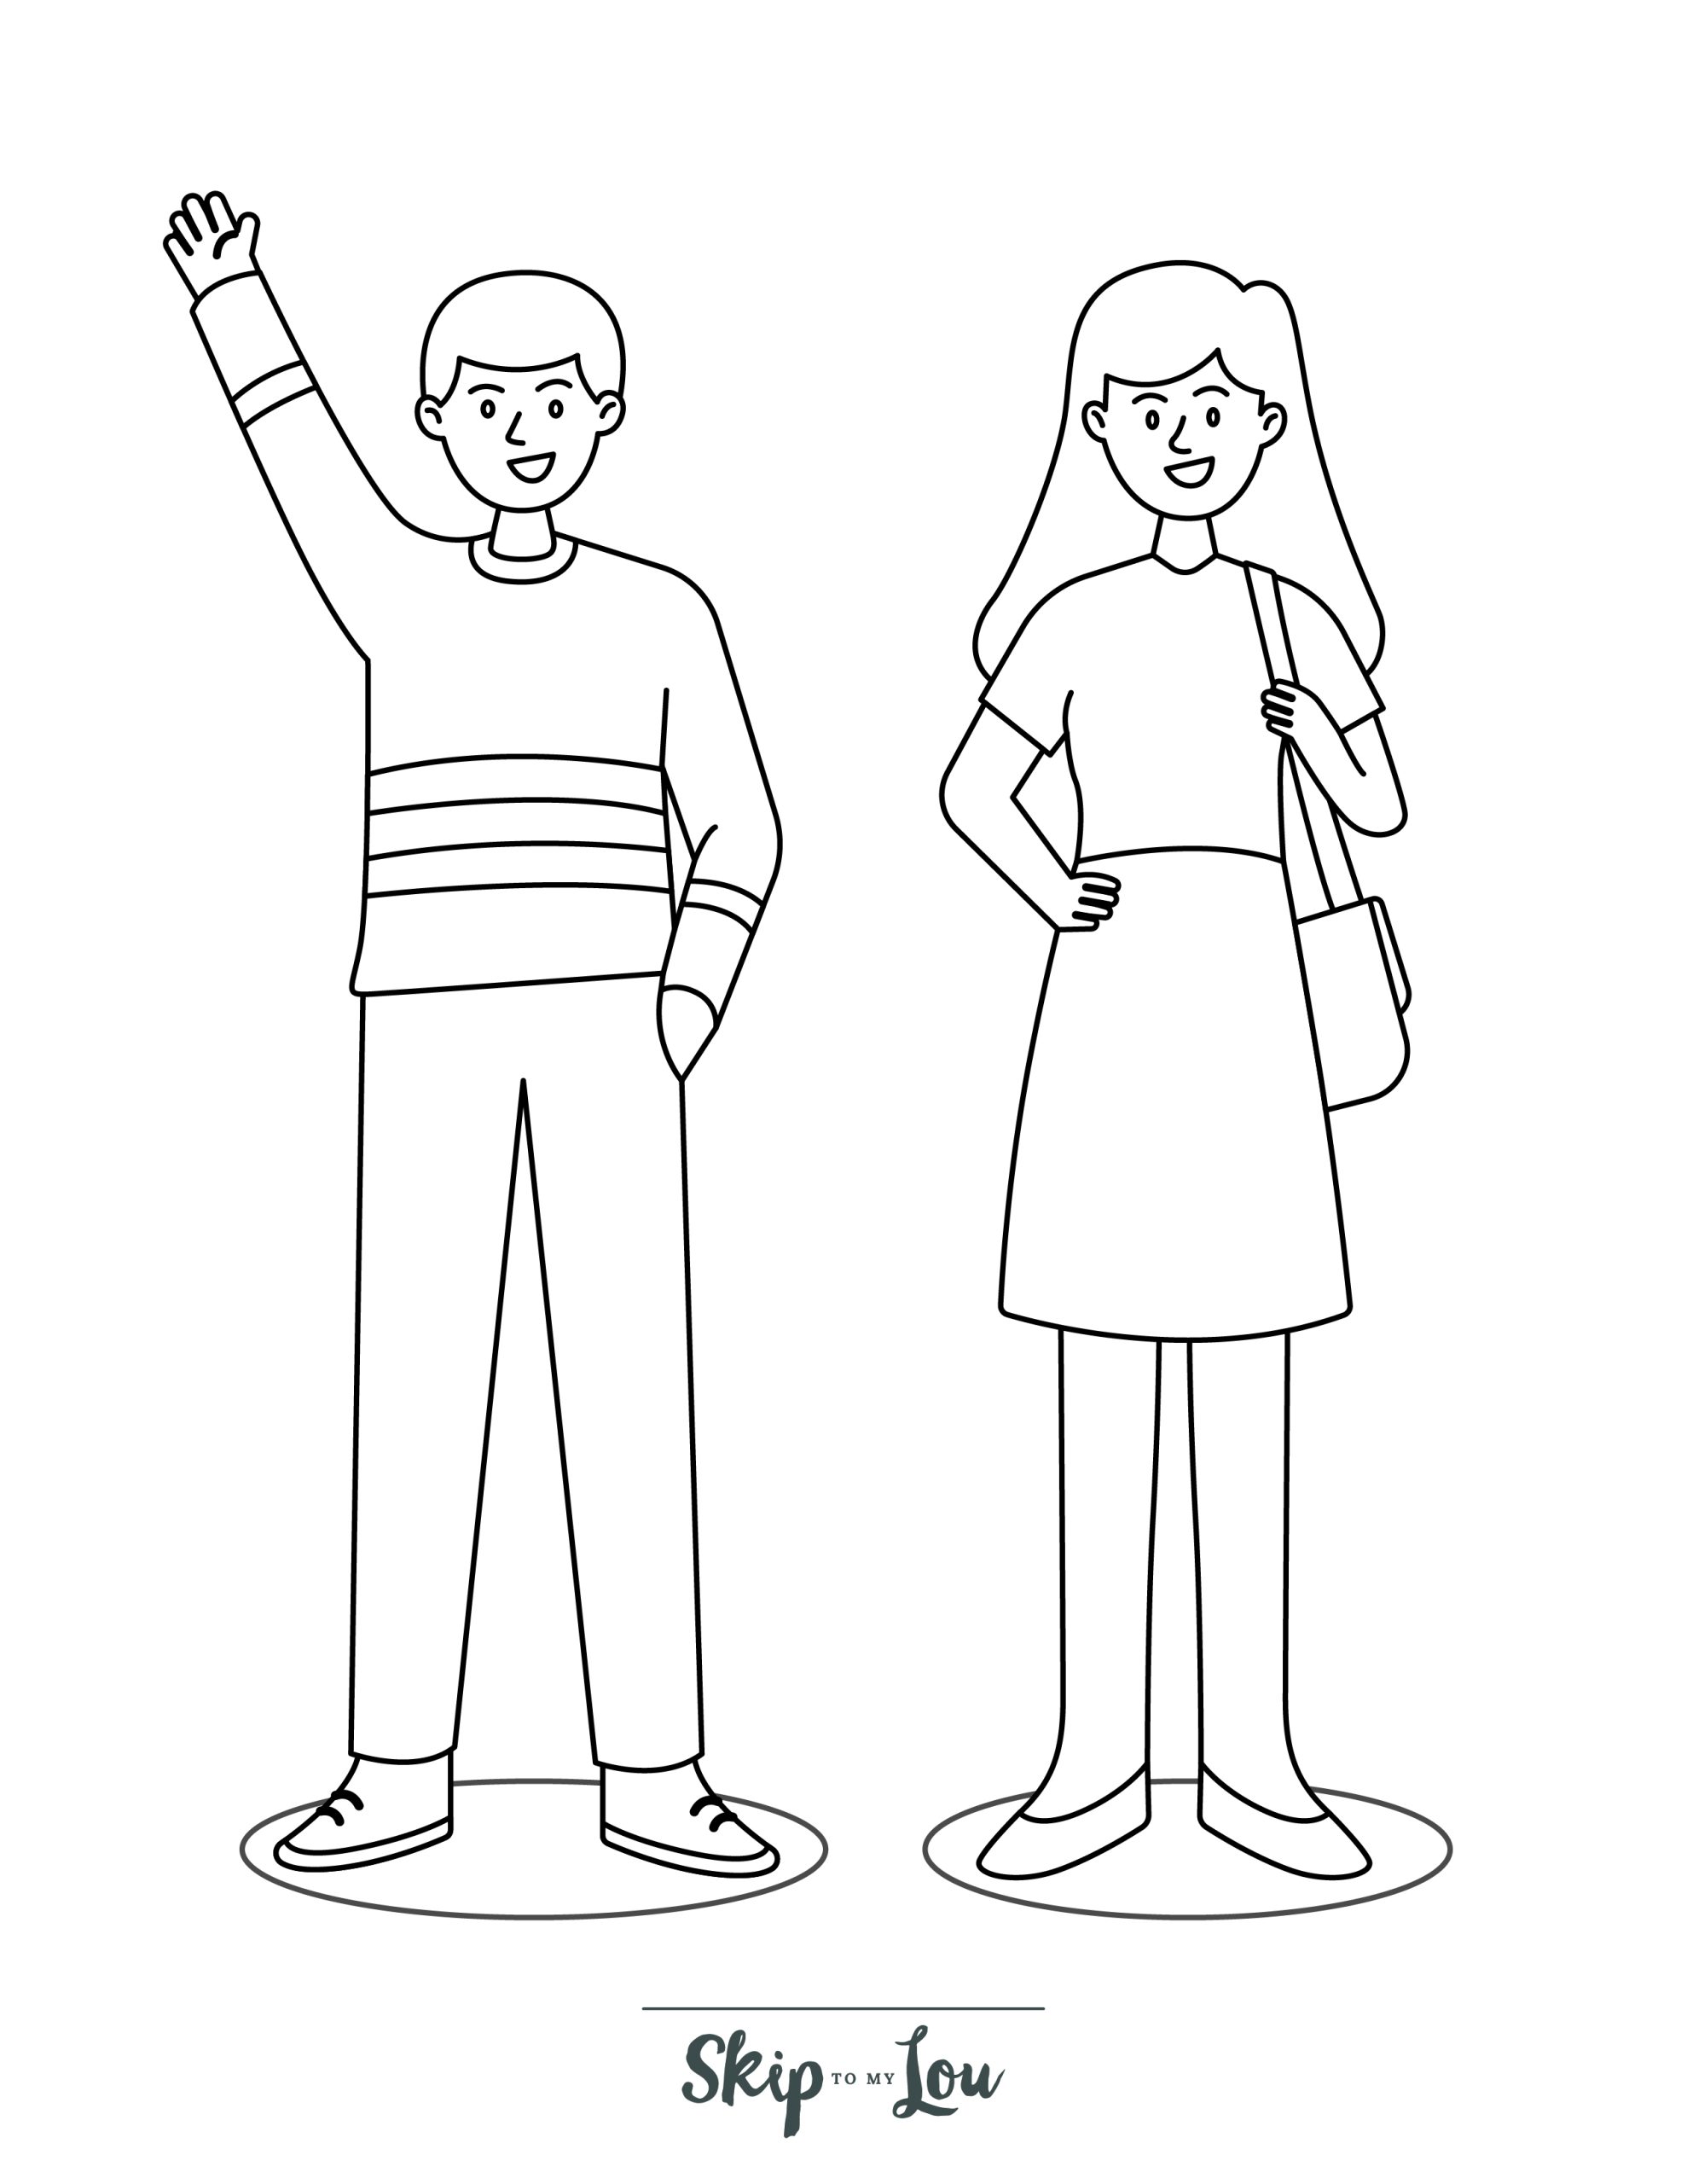 People Coloring Page 4 - Line drawing of cute couple standing